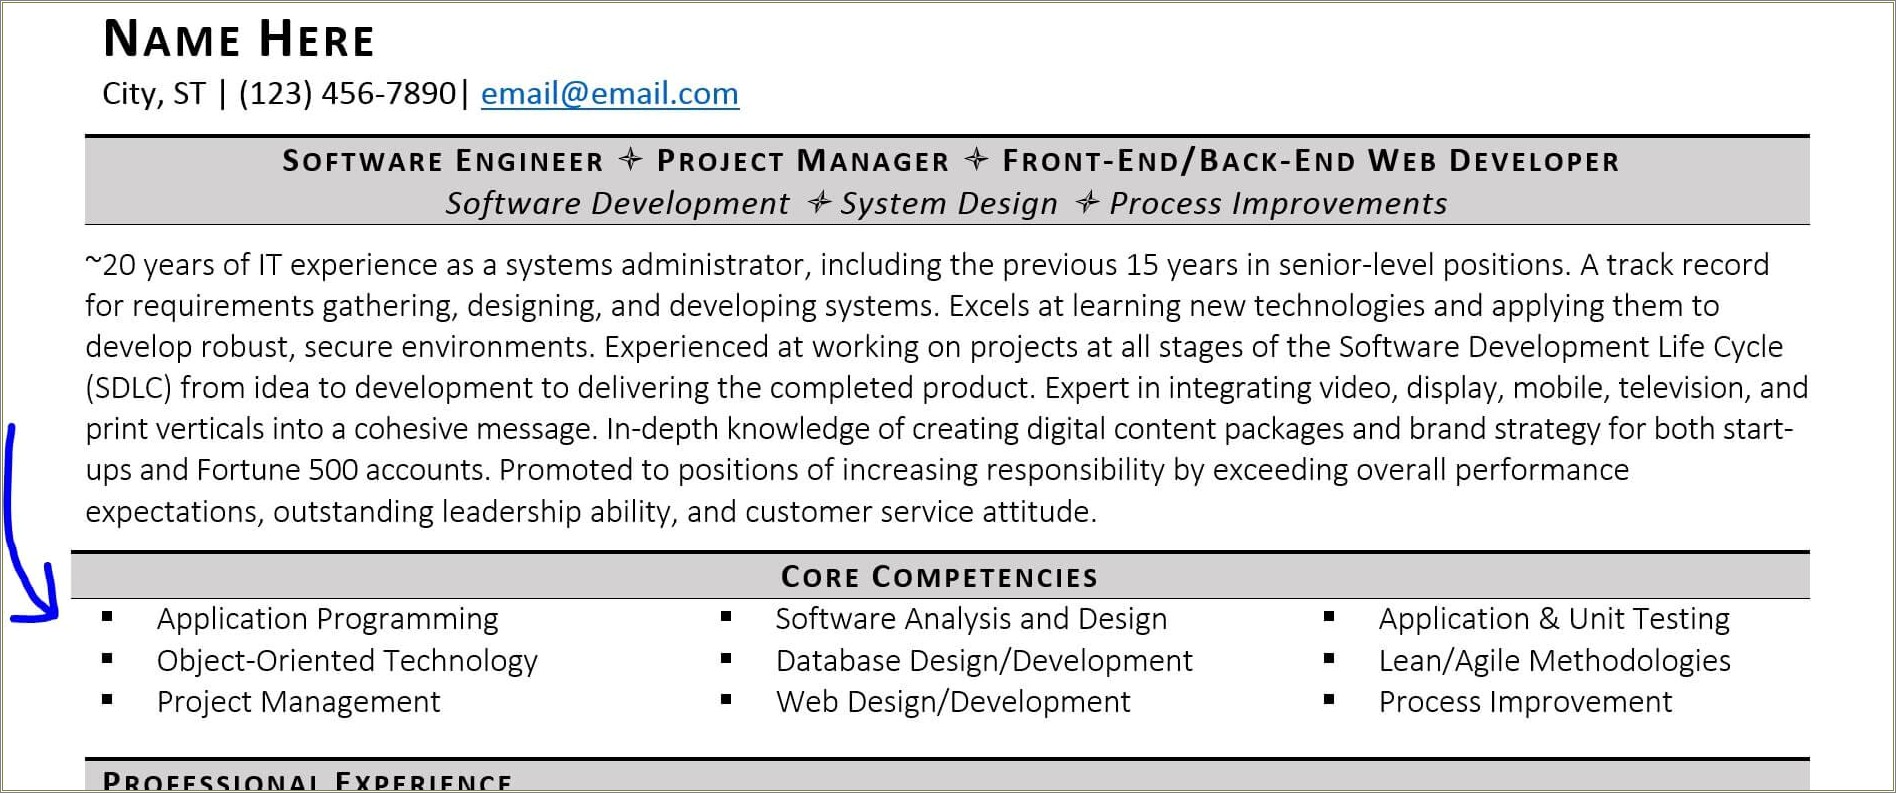 Sample Resume Technical Proficiency Examples